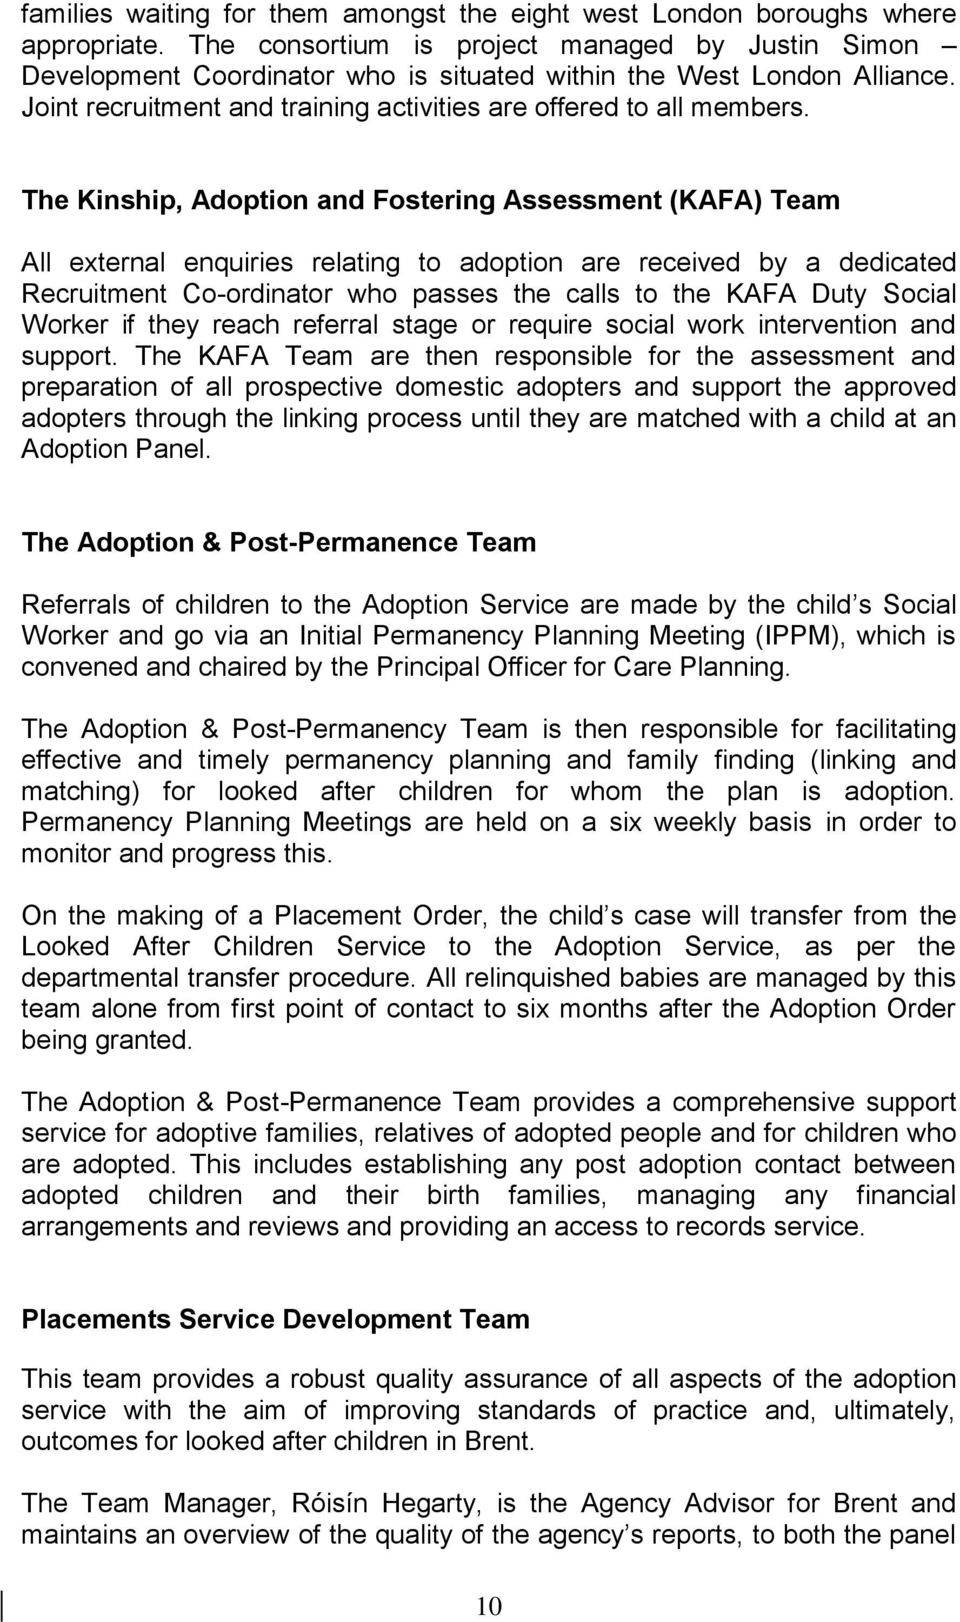 The Kinship, Adoption and Fostering Assessment (KAFA) Team All external enquiries relating to adoption are received by a dedicated Recruitment Co-ordinator who passes the calls to the KAFA Duty